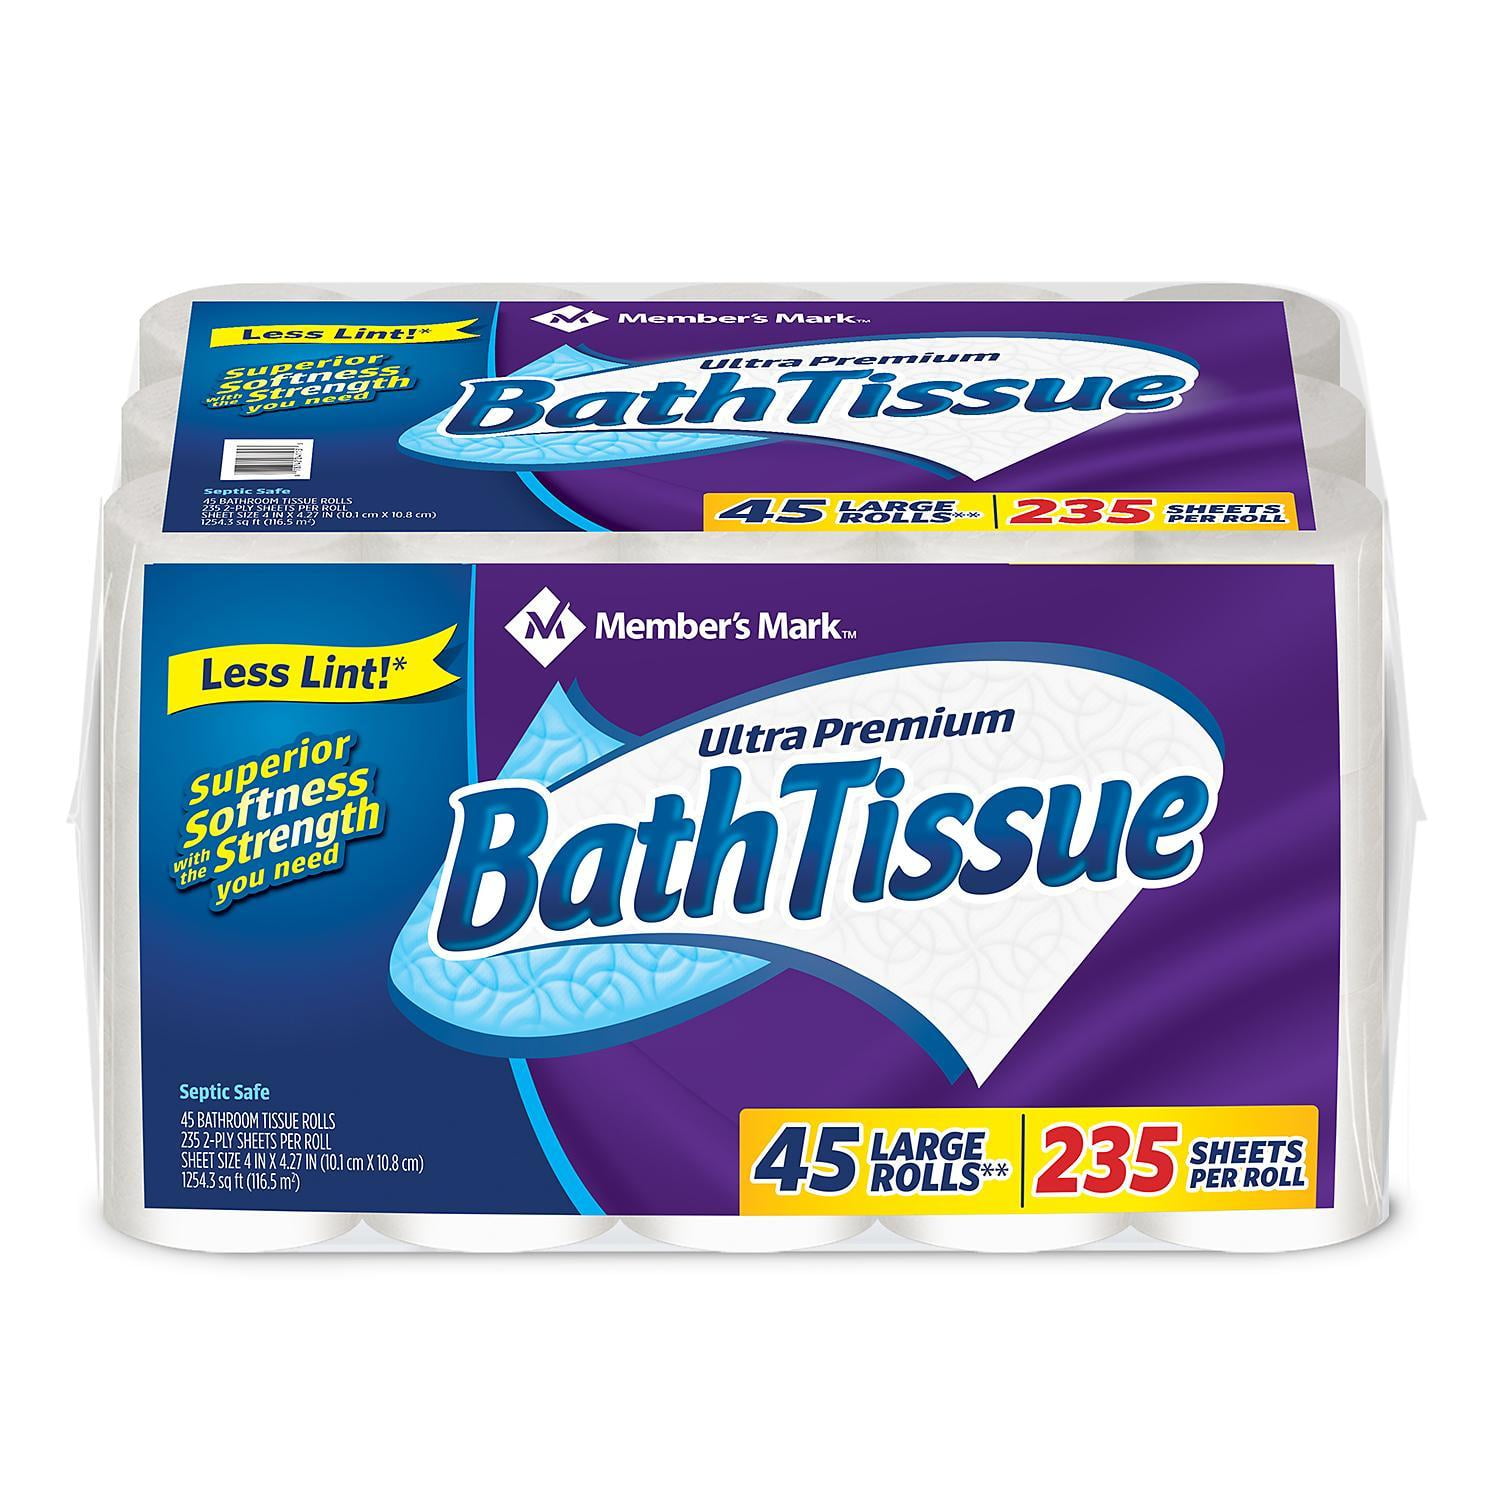 39600 Sheets 36 Count SCOTT Bath Tissue Roll for sale online 